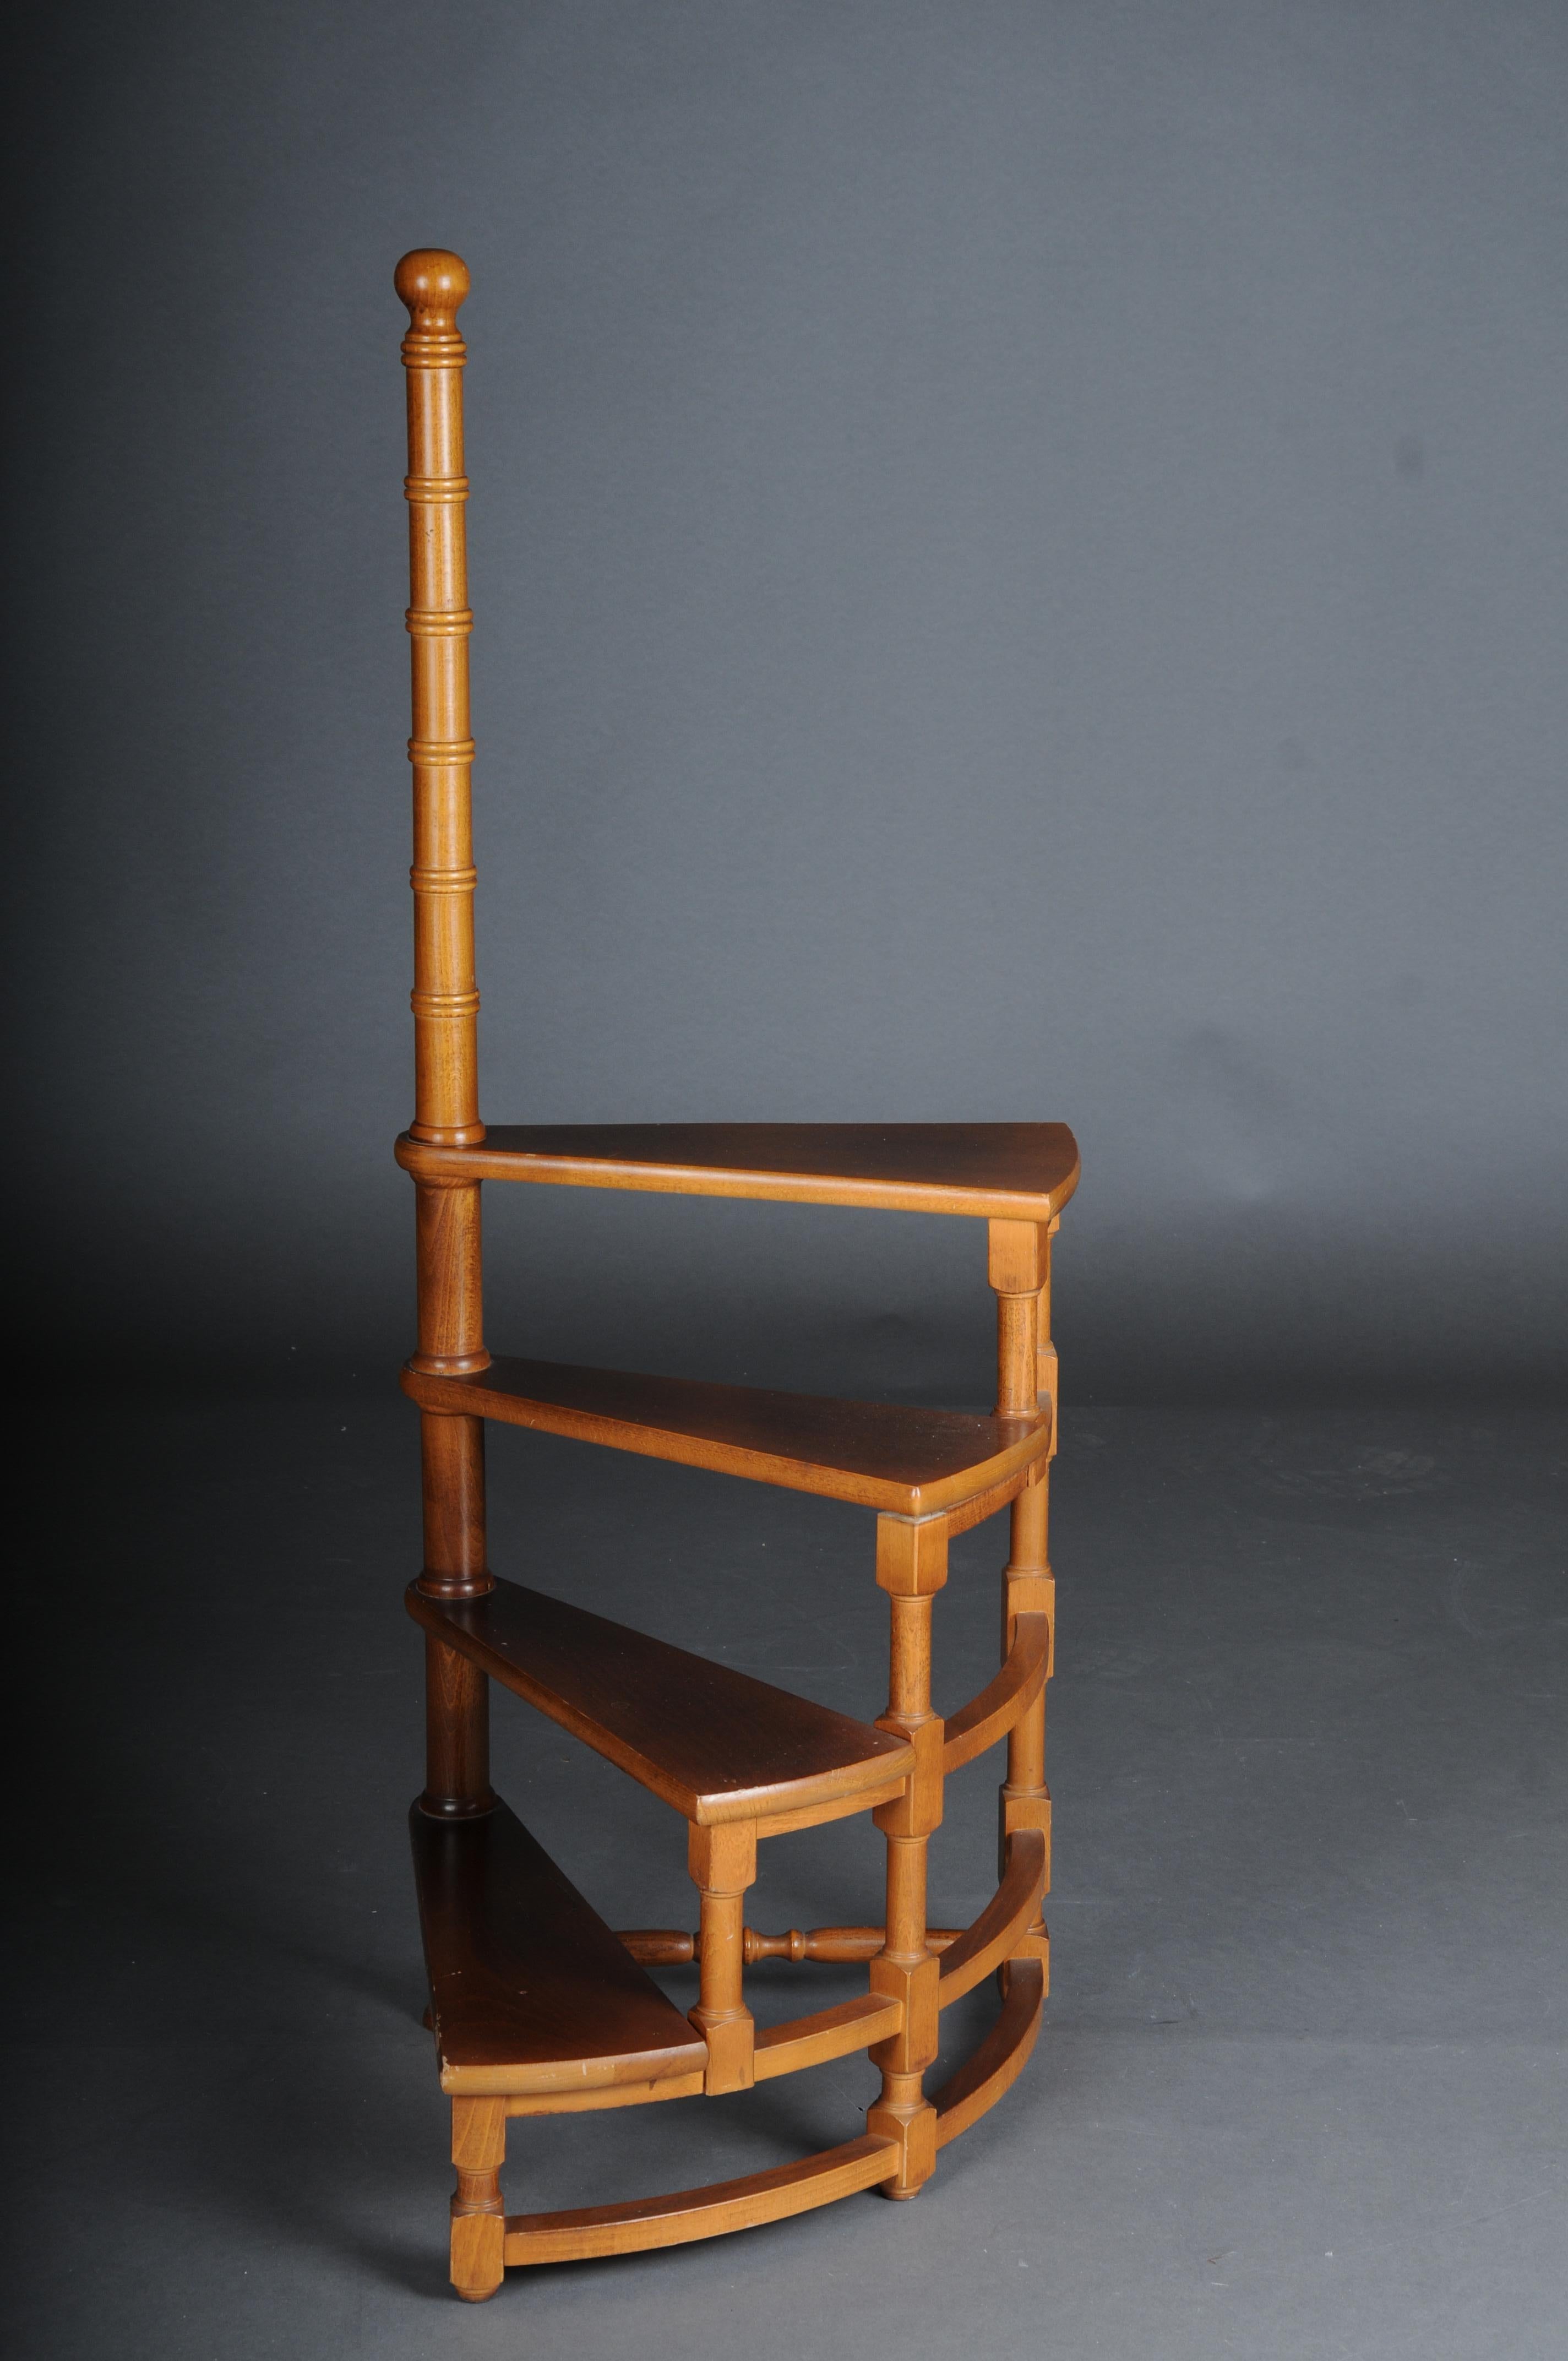 20th Century English leather library step or stairs / stepladder, Victorian.

Solid wood mahogany stained. English library manager / stepladder 20th century, Victorian. Four step with. Library stairs, England, 20th century.